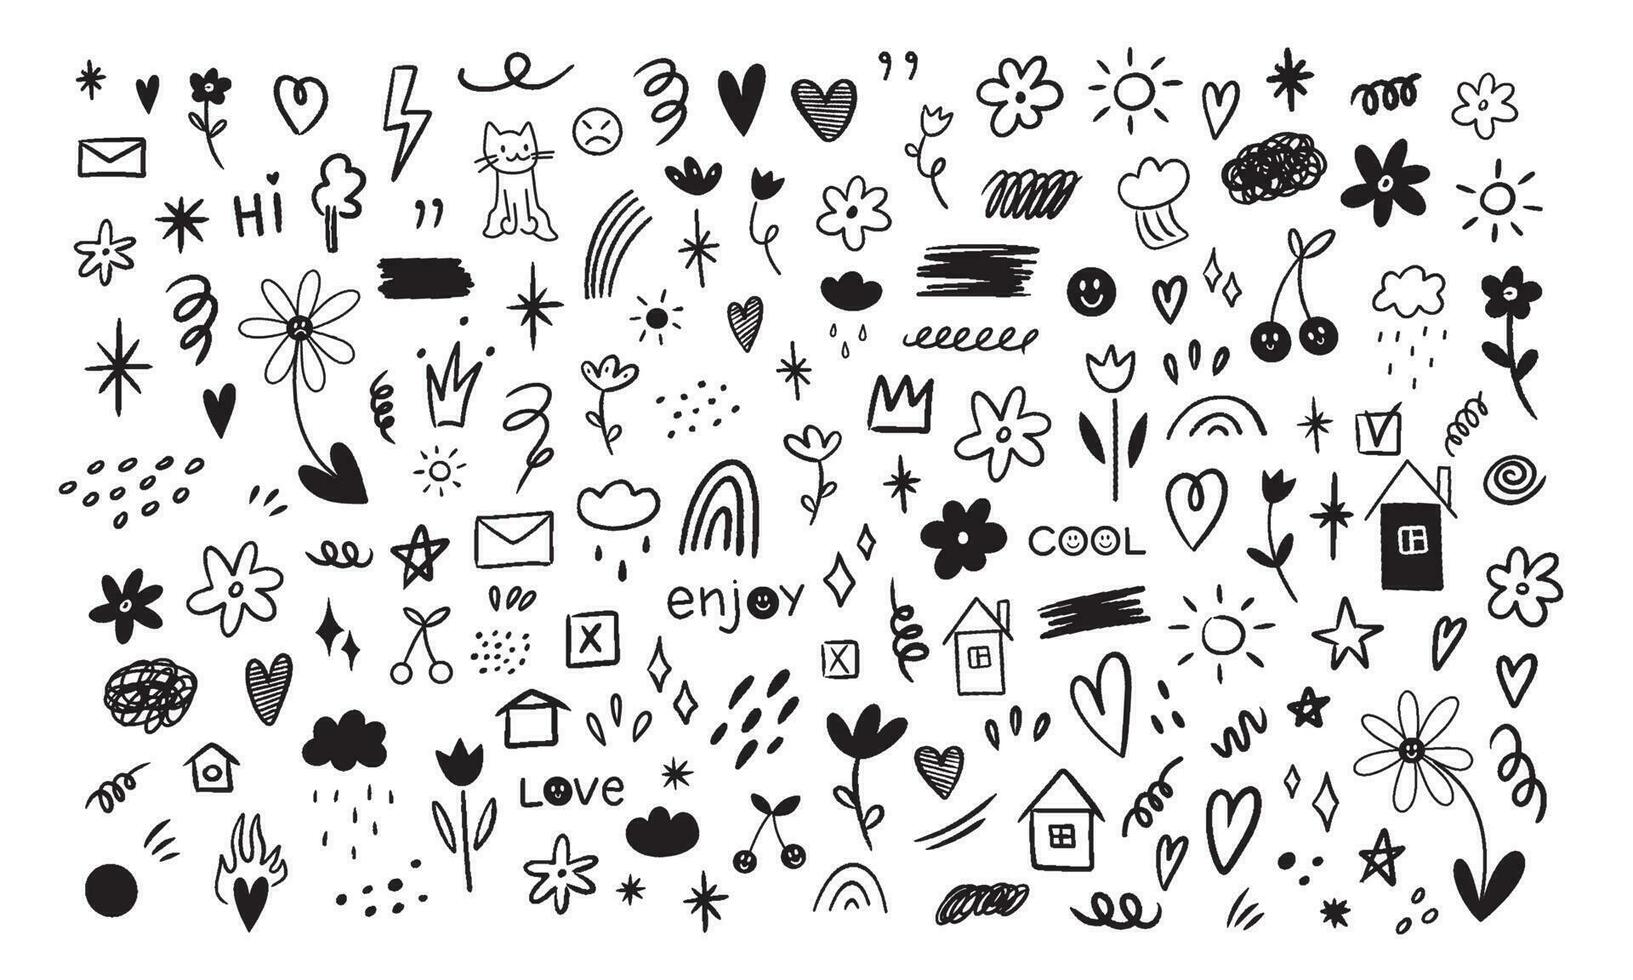 Hand drawn set of simple decorative elements. Various icons such as hearts, stars, speech bubbles, arrows, lines isolated on white background. vector